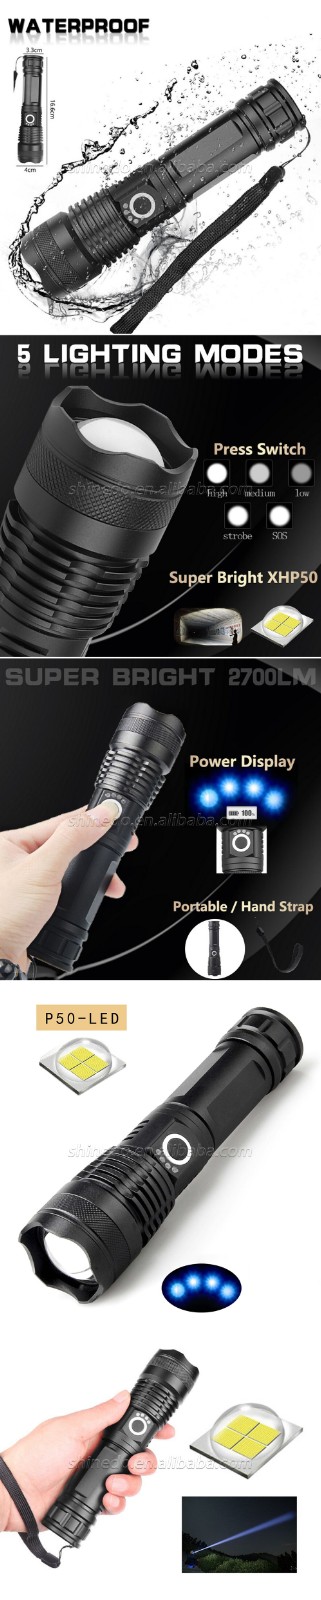 Super Bright Outdoor Aluminum Waterproof with P50 LED Rechargeable Torch Flashlight SD-SL308